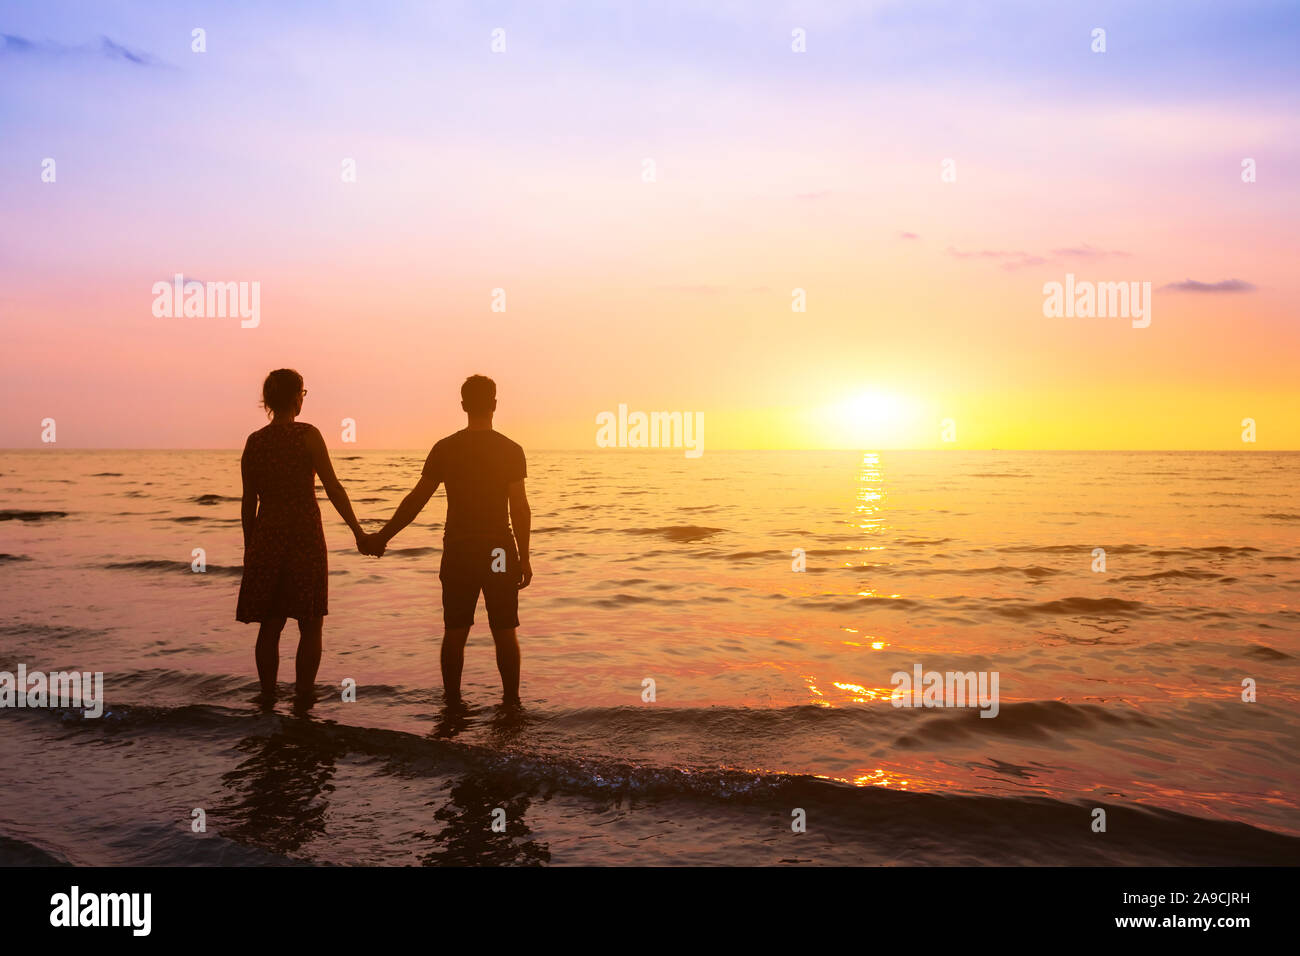 Romantic couple on the beach at sunset watching horizon, honeymoon vacation holidays at sea destination, silhouette of two lovers holding hand Stock Photo